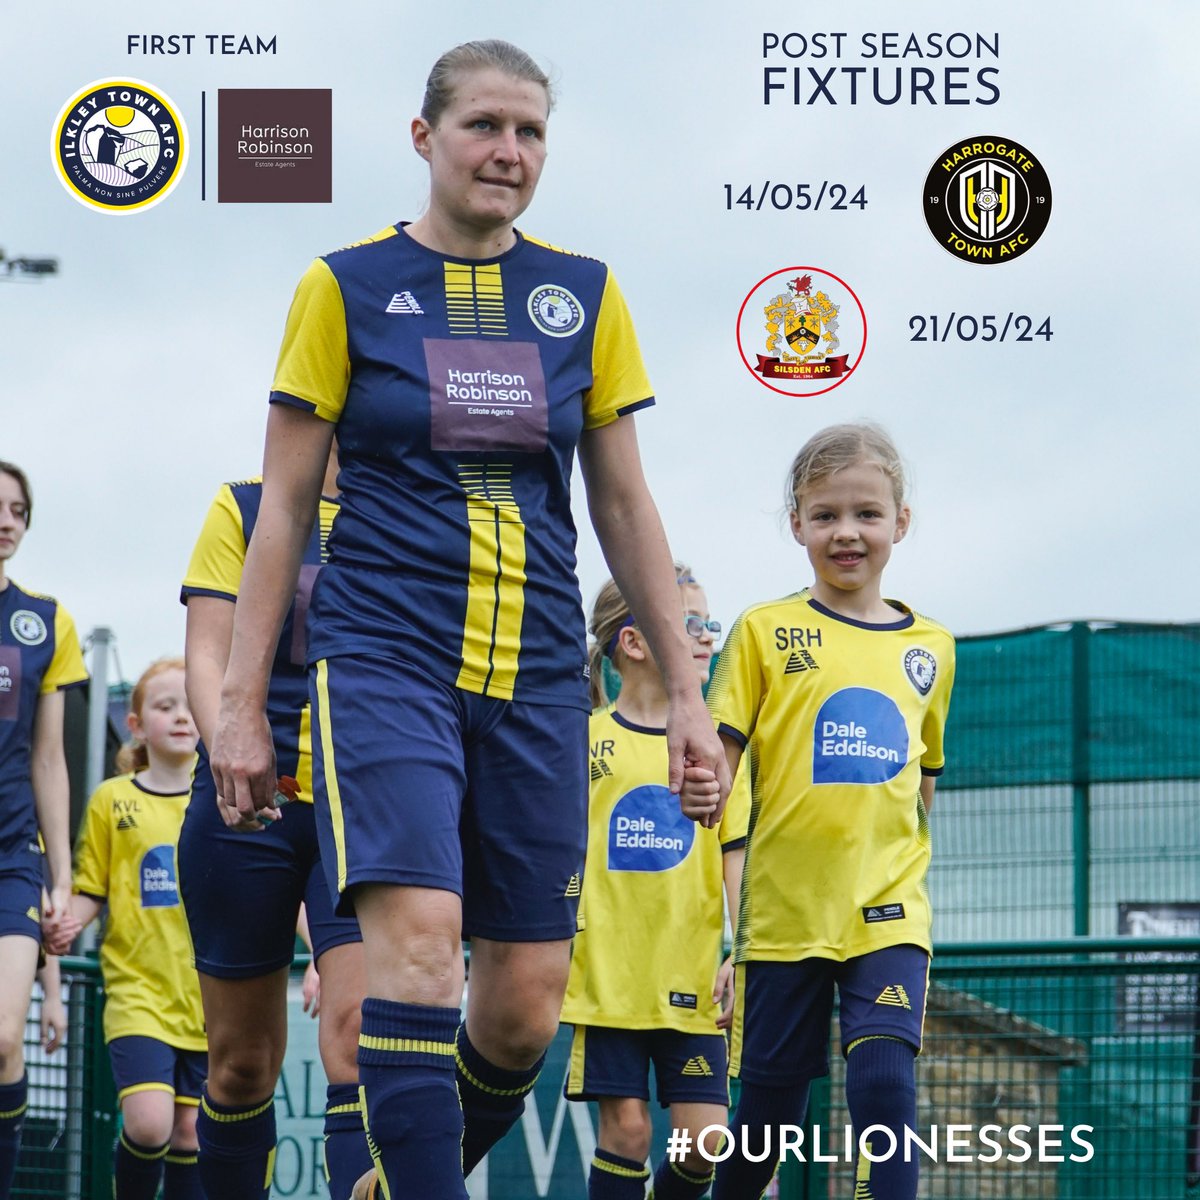 There’s still time to catch our championship winning women’s team in action as they take on @HGTTownWomen and @SilsdenLadies in two incredibly tough & challenging fixtures! Thanks to our sponsor @hrestateagents #ourlionesses #bahtatters #thisgirlcan #hergametoo #footballforall